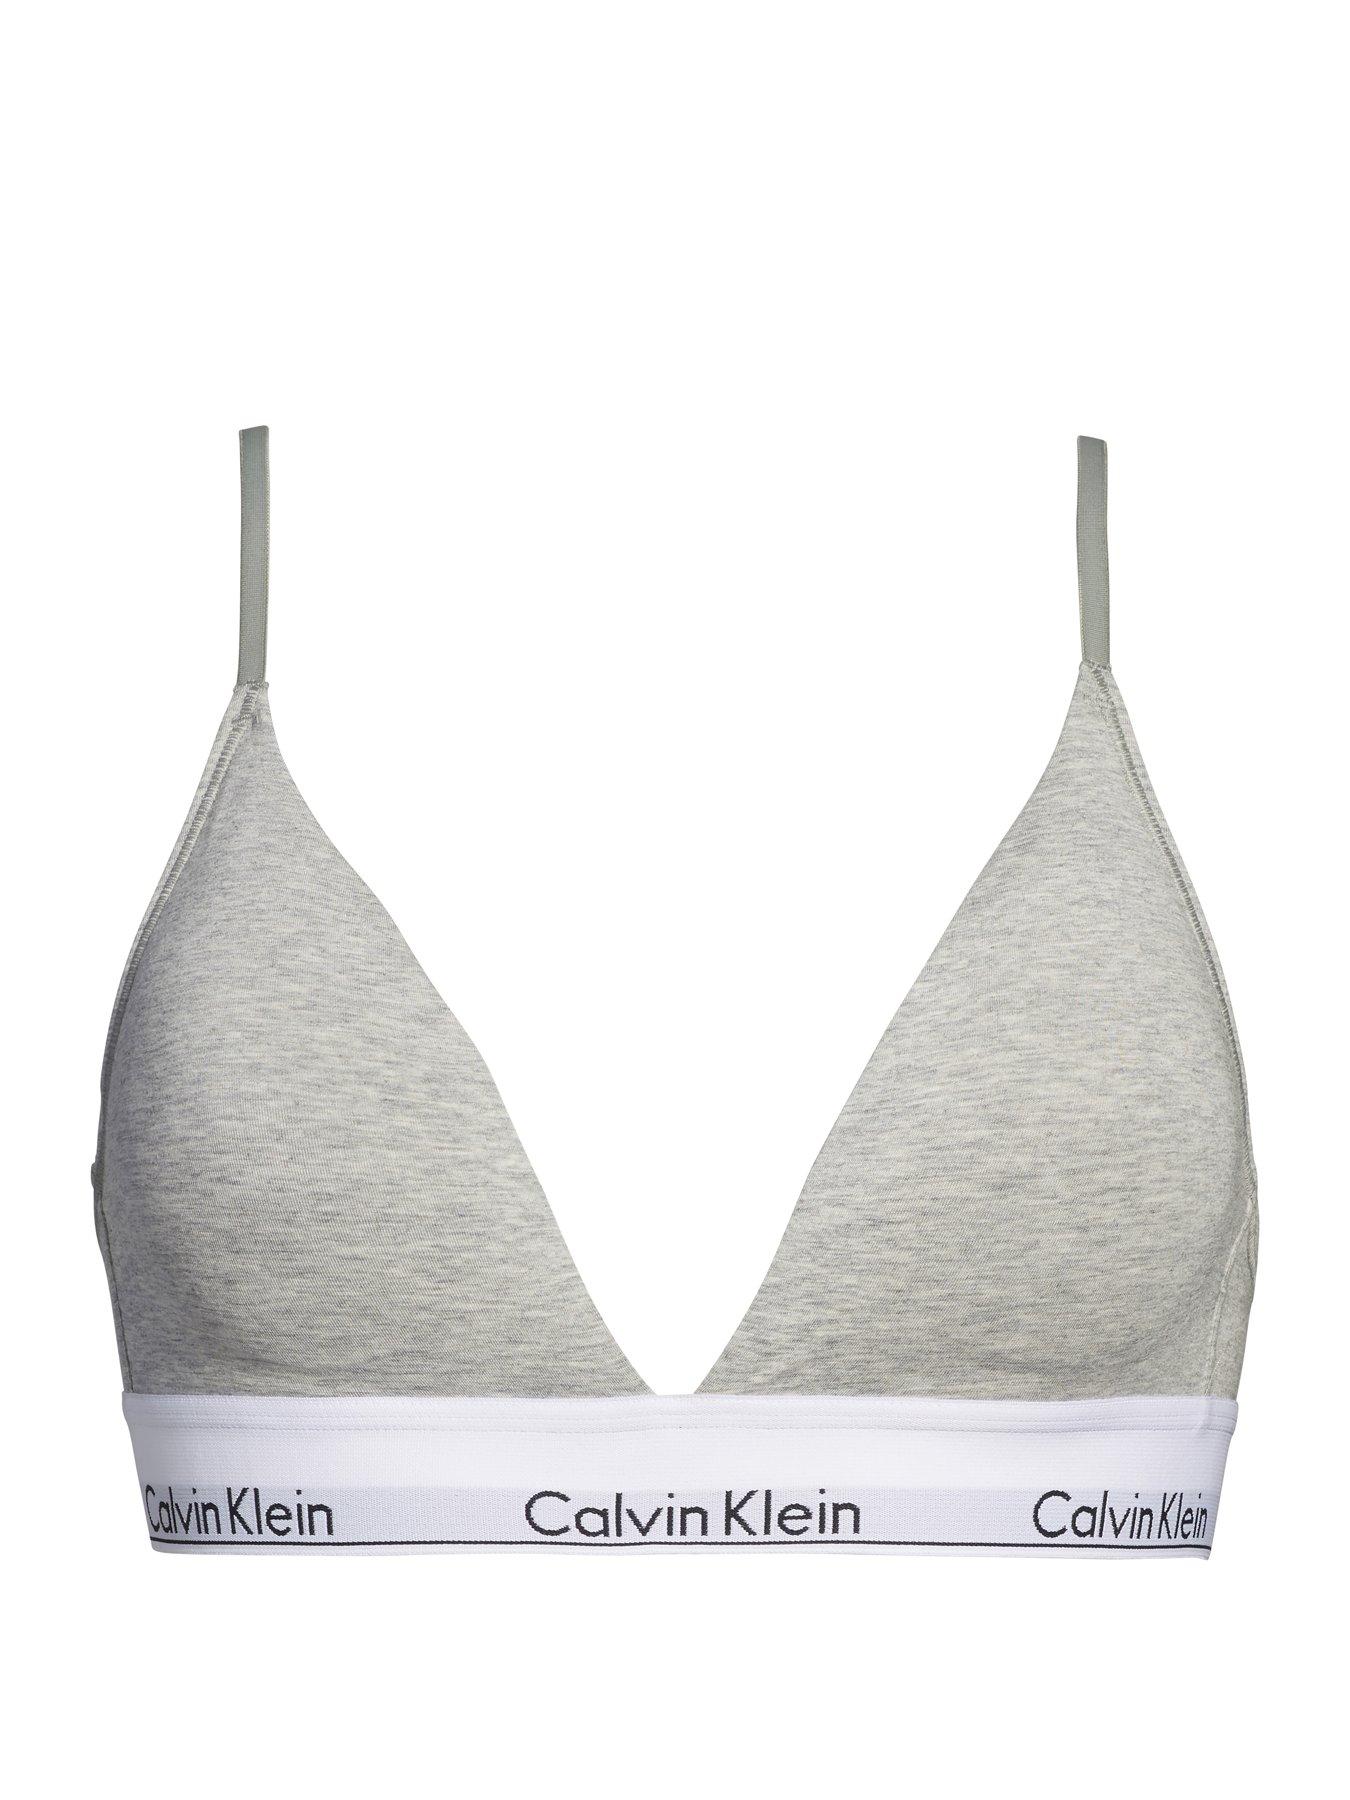 Calvin Klein envy bra 34b new with tags plunge